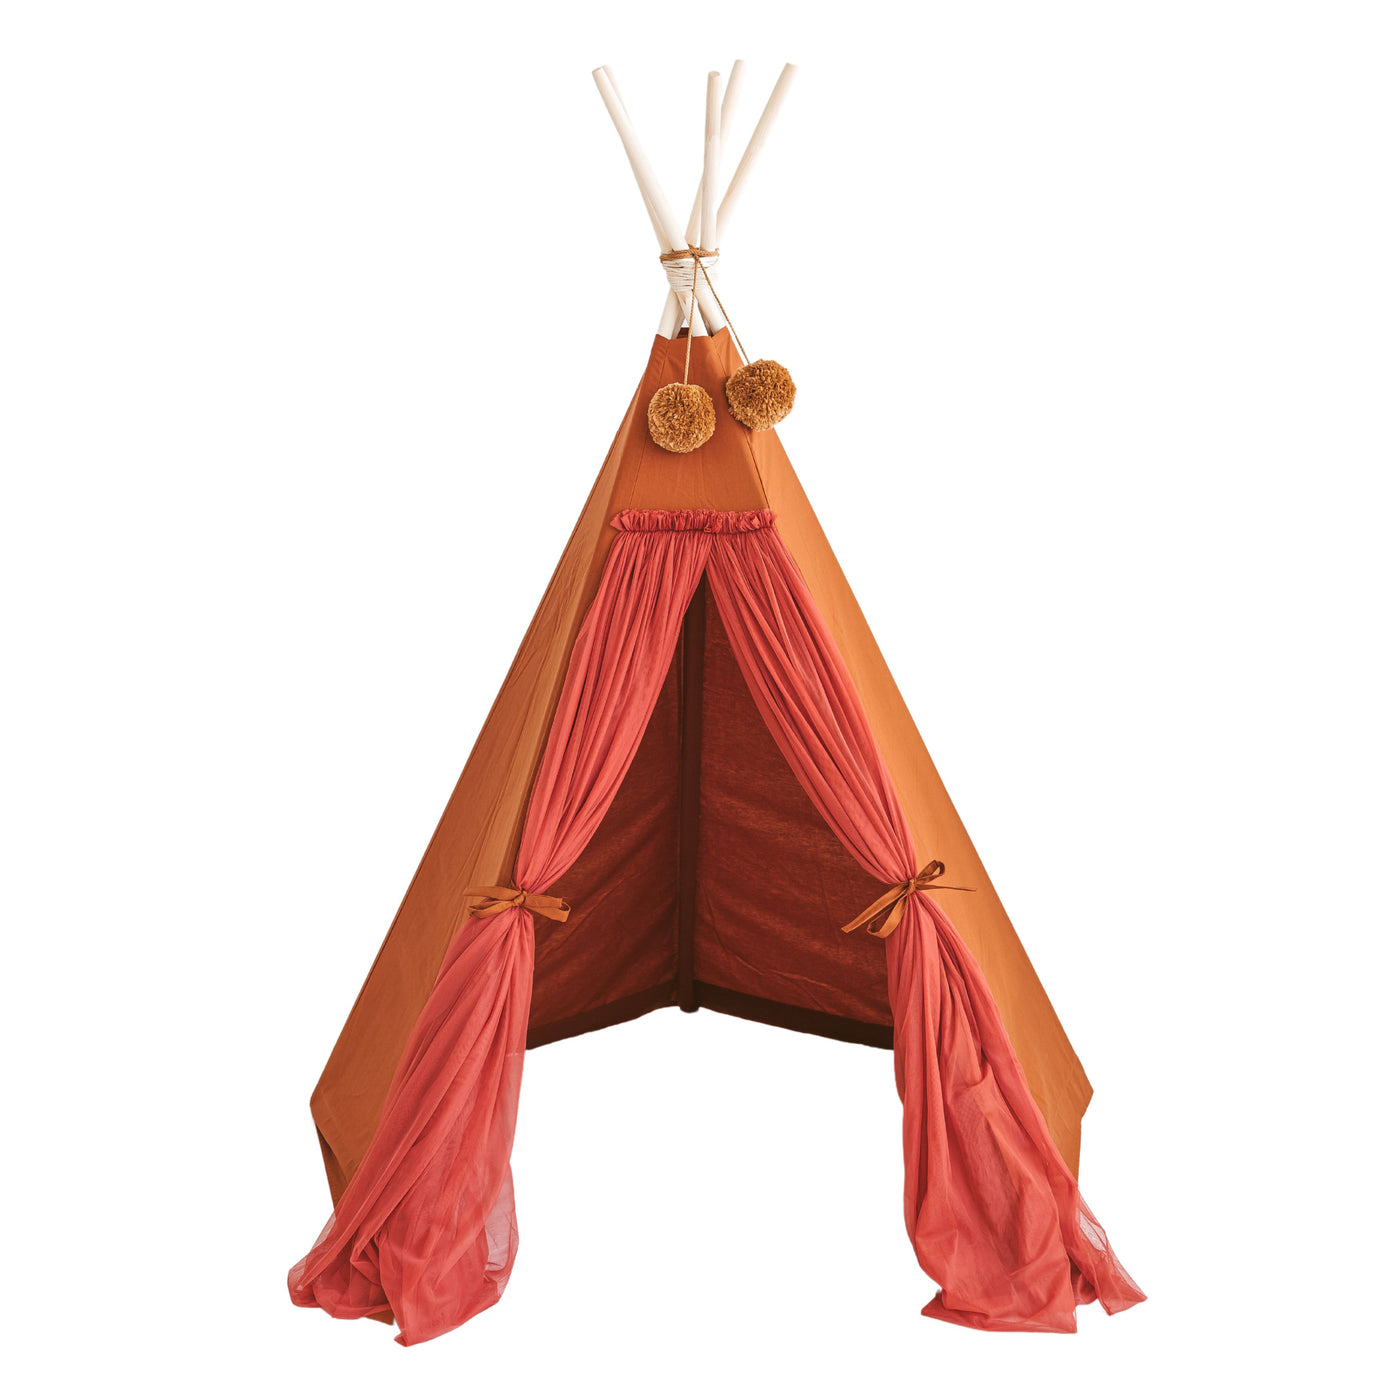 Minicamp Fairy Kids Play Tent With Tulle In Cognac-Teepee-minicamp-Yes Bebe